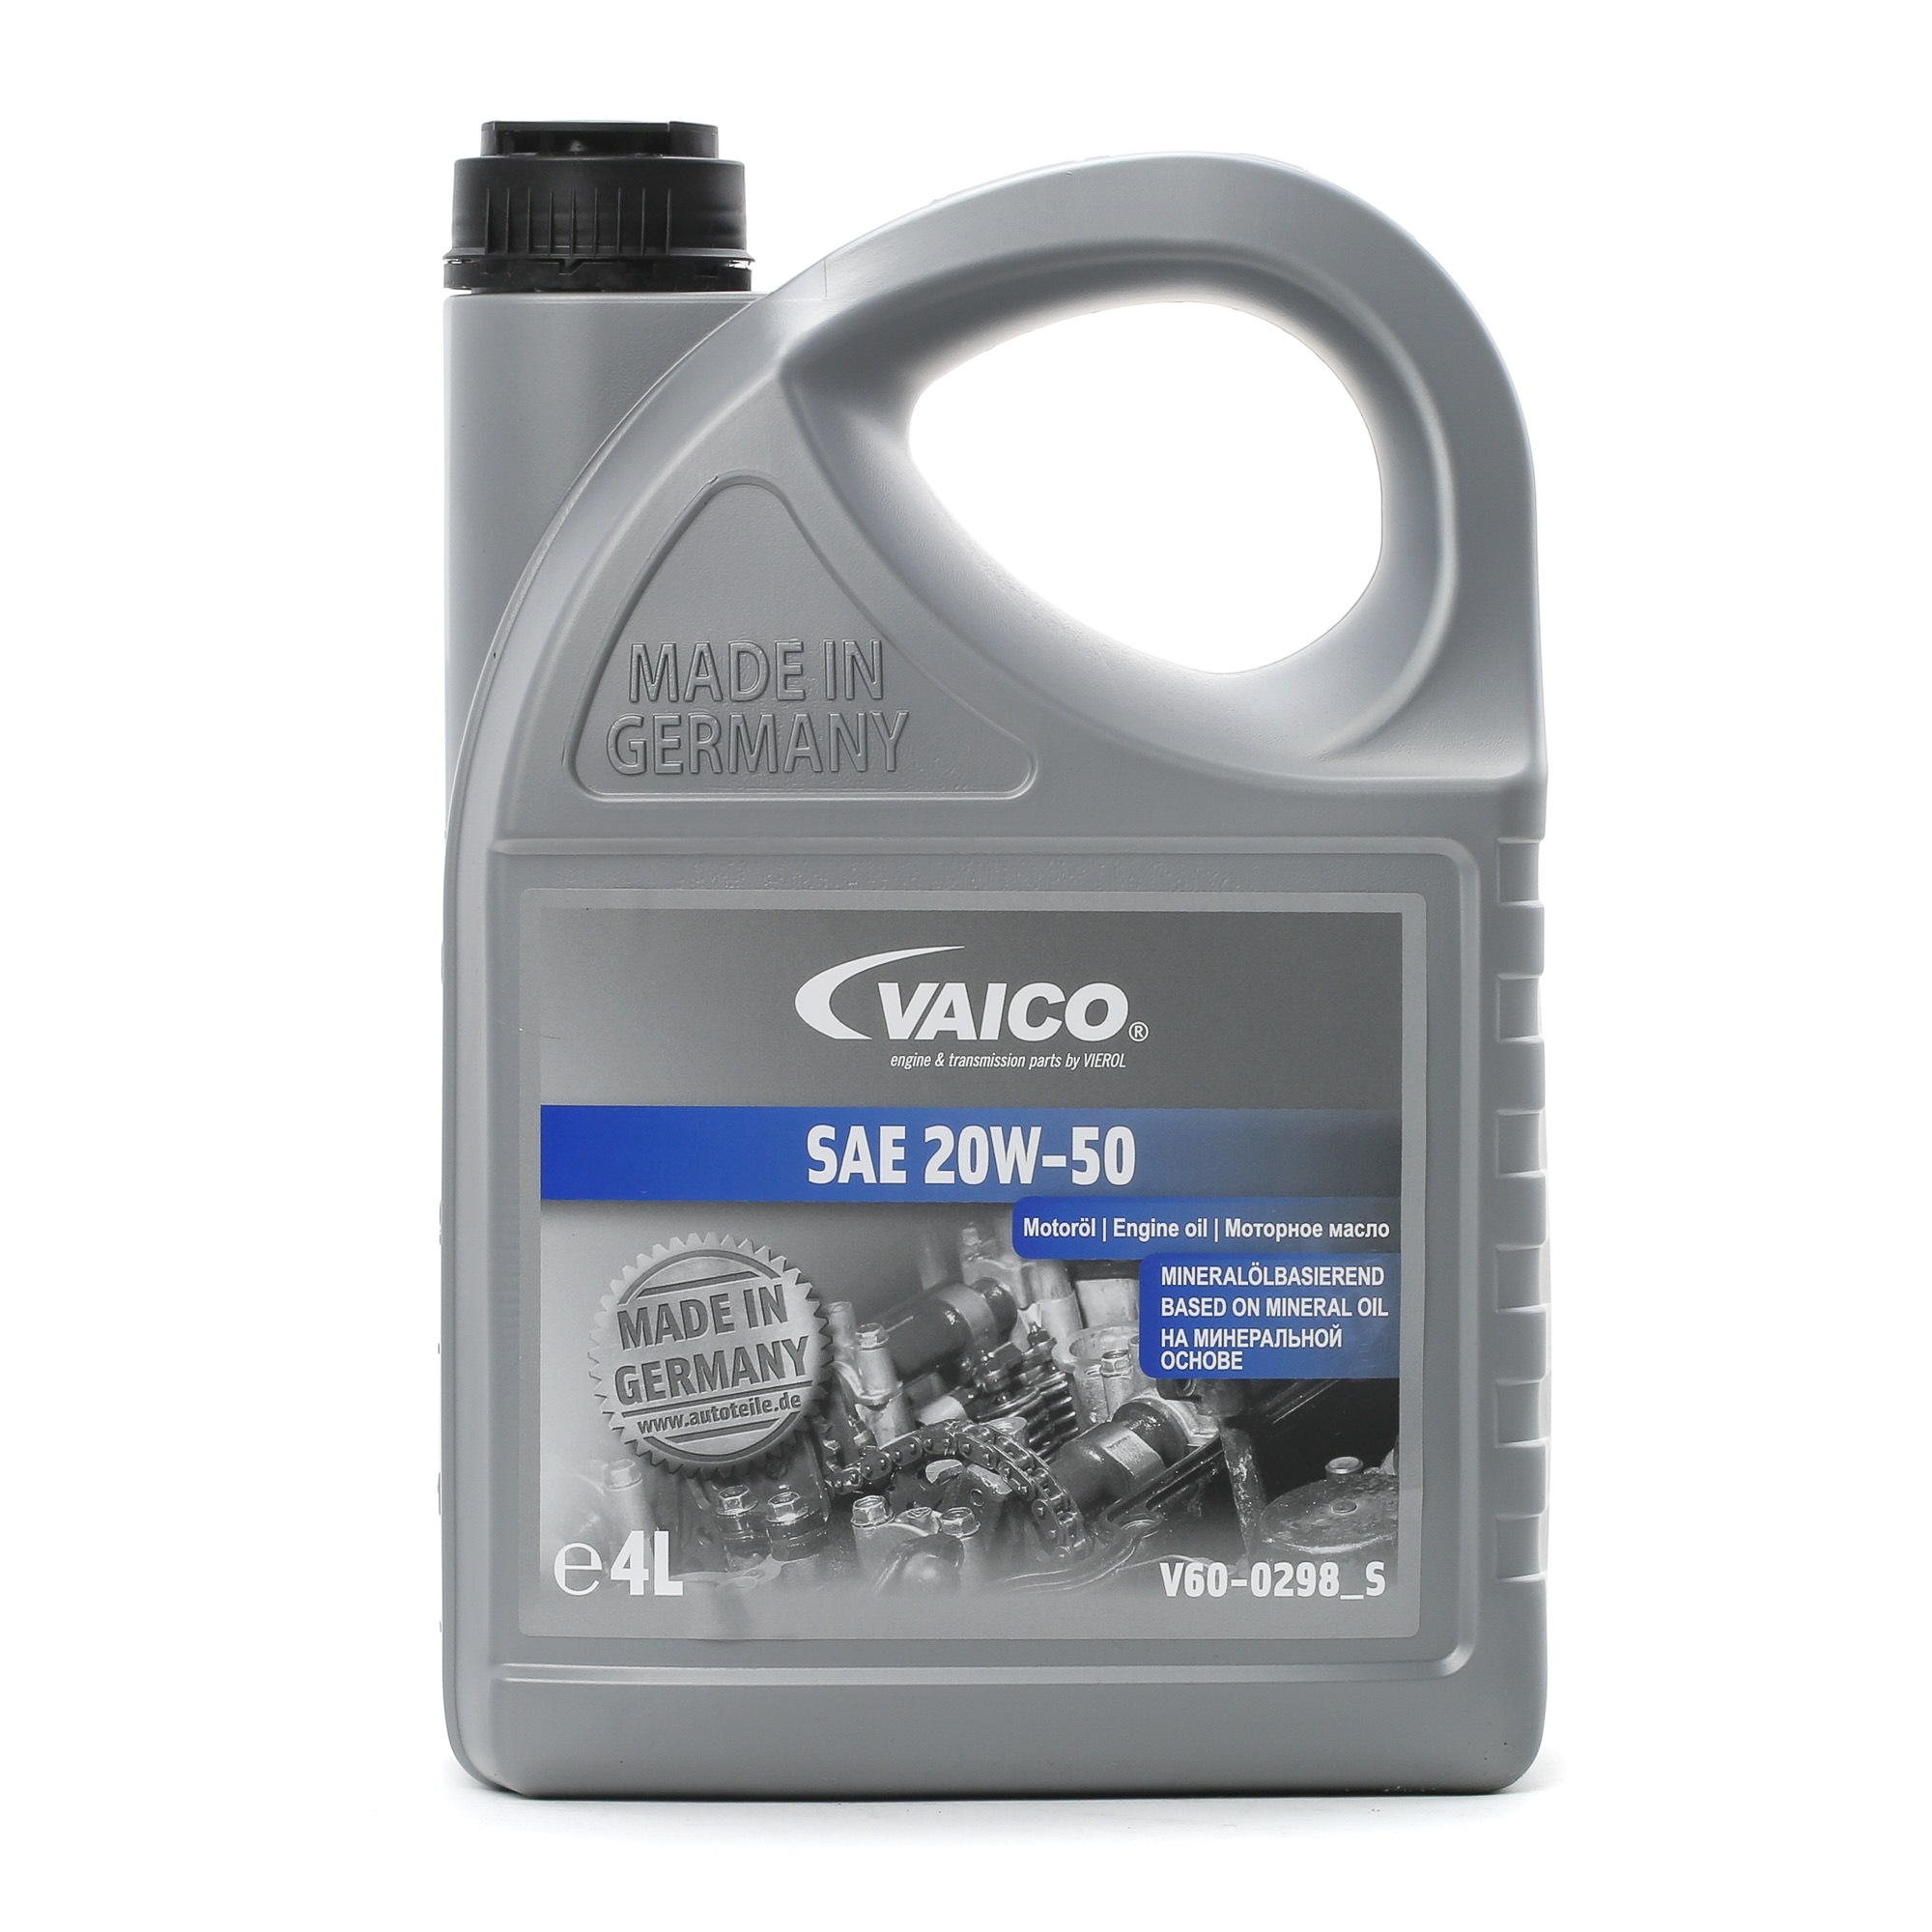 VAICO V60-0298_S Engine oil RENAULT experience and price